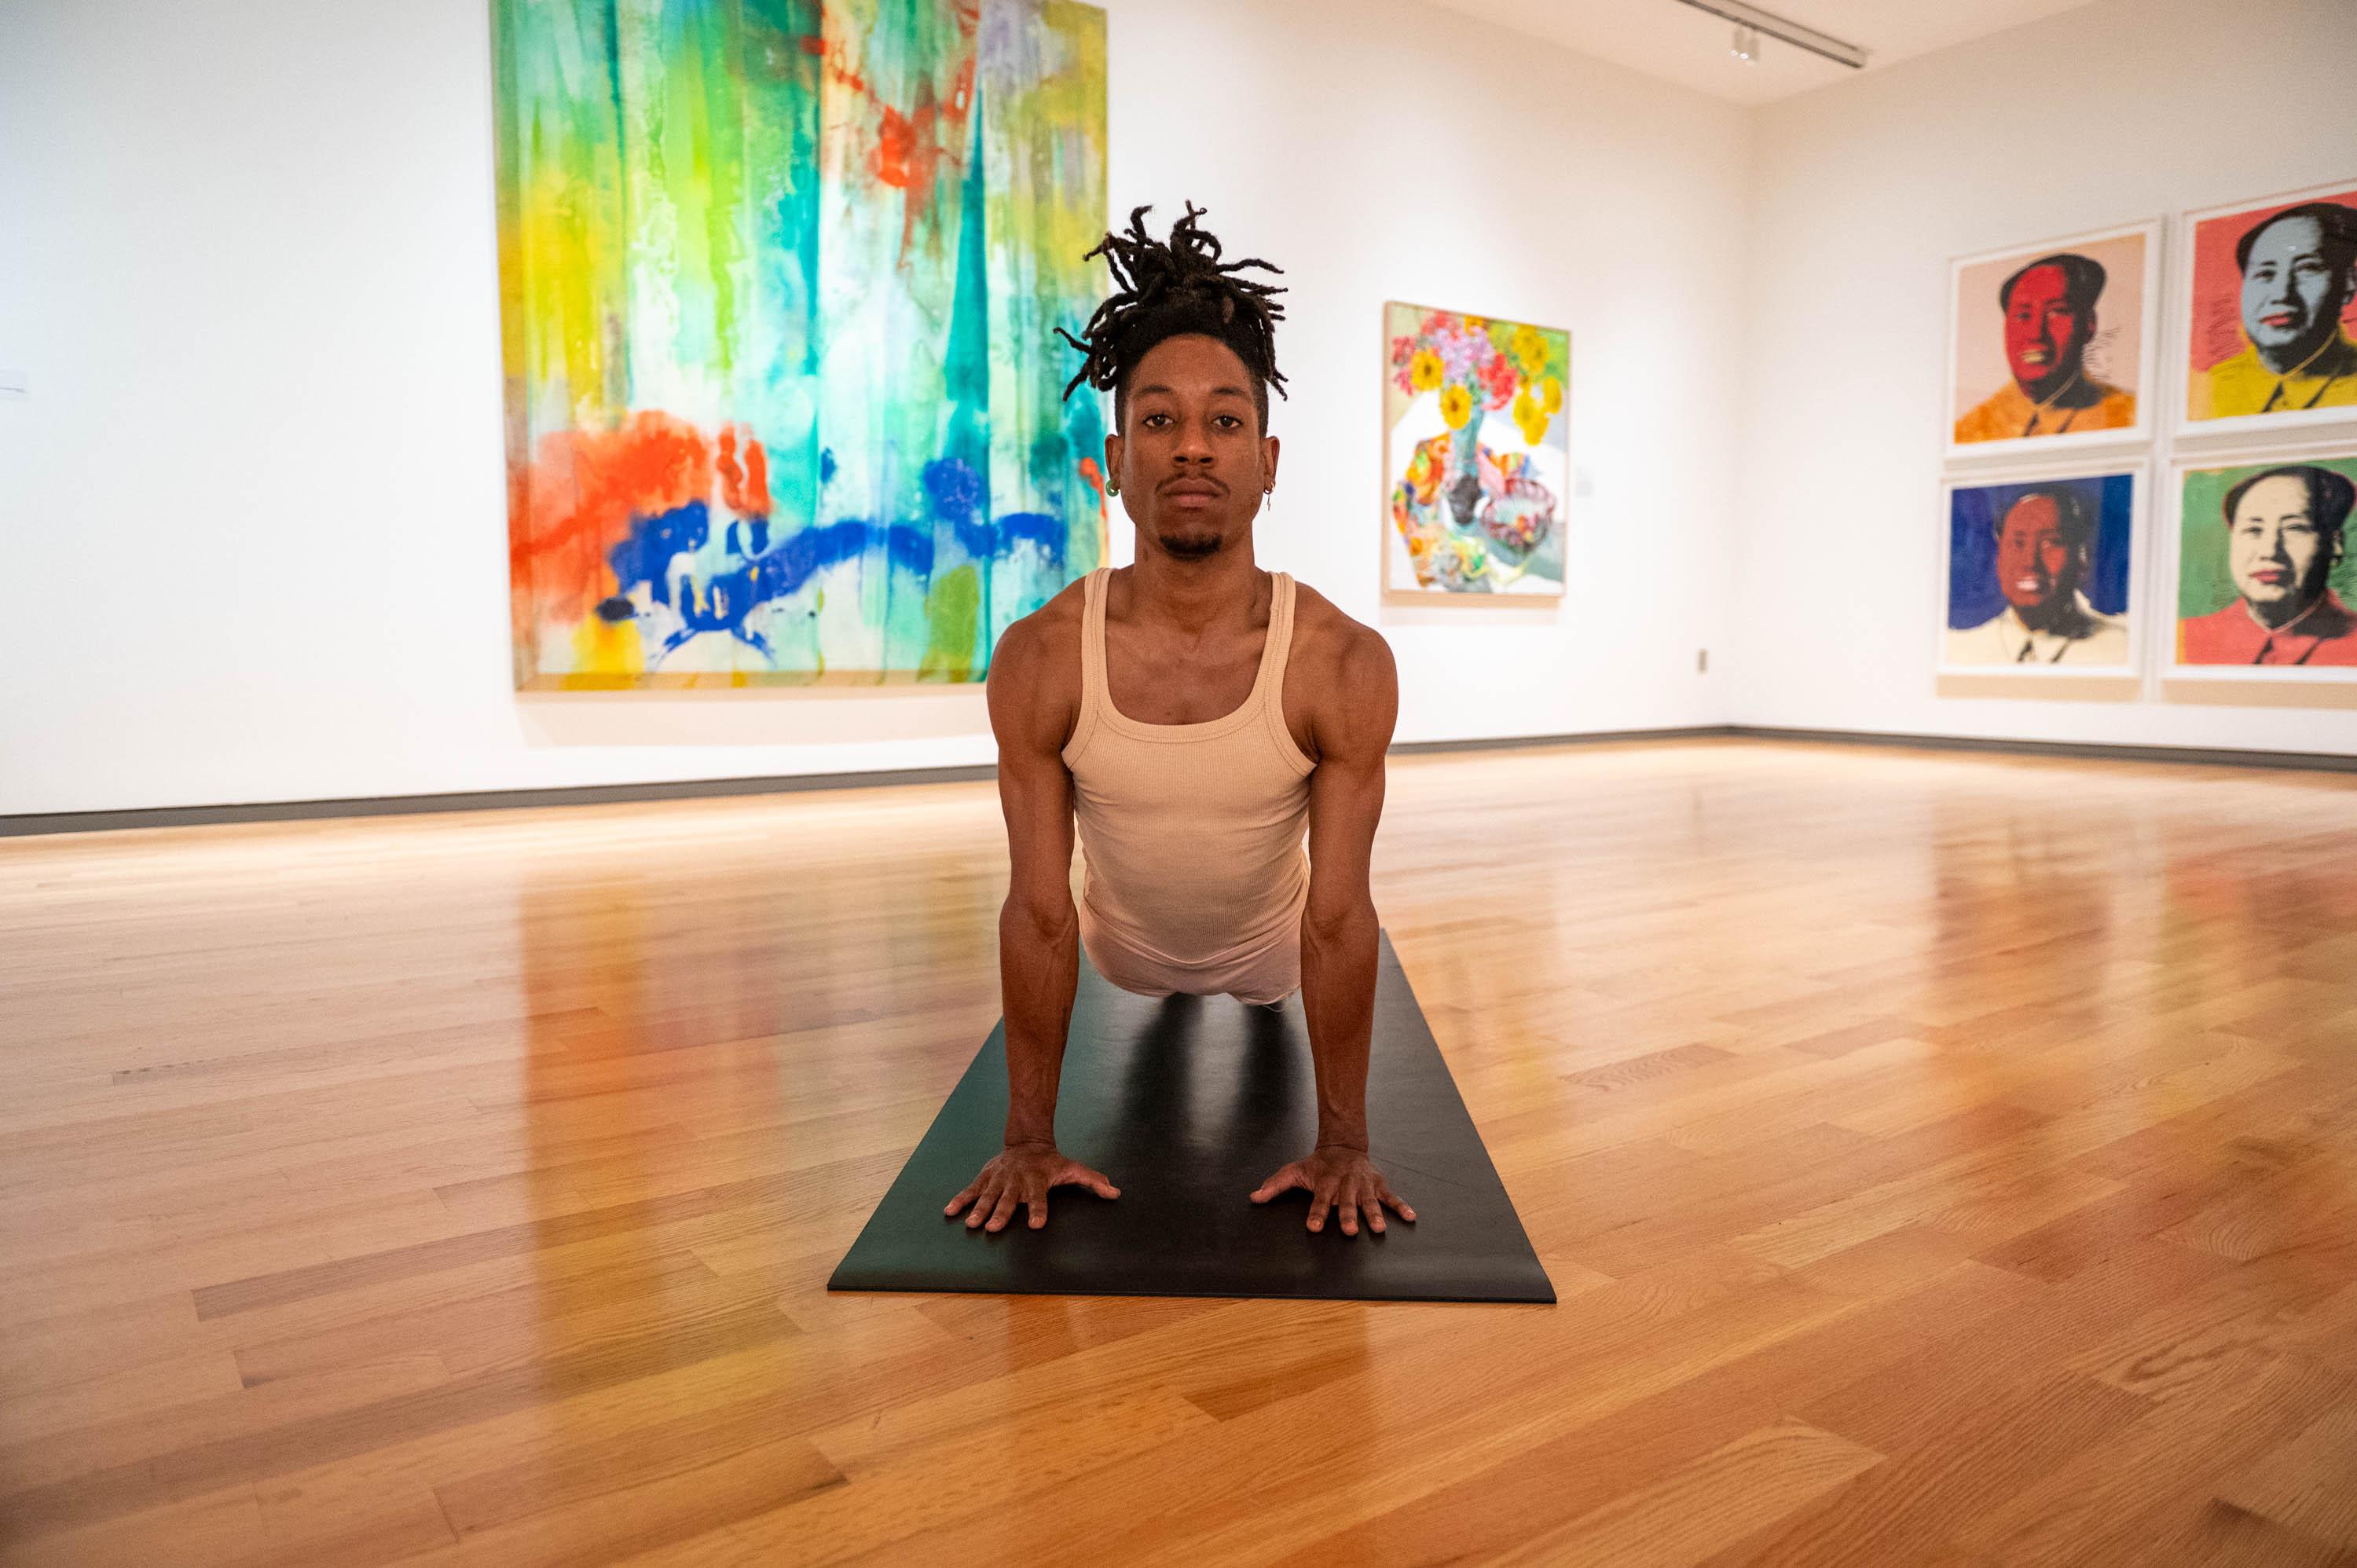 Dre Drummond in yoga pose in Gallery 20 with colorful paintings in background